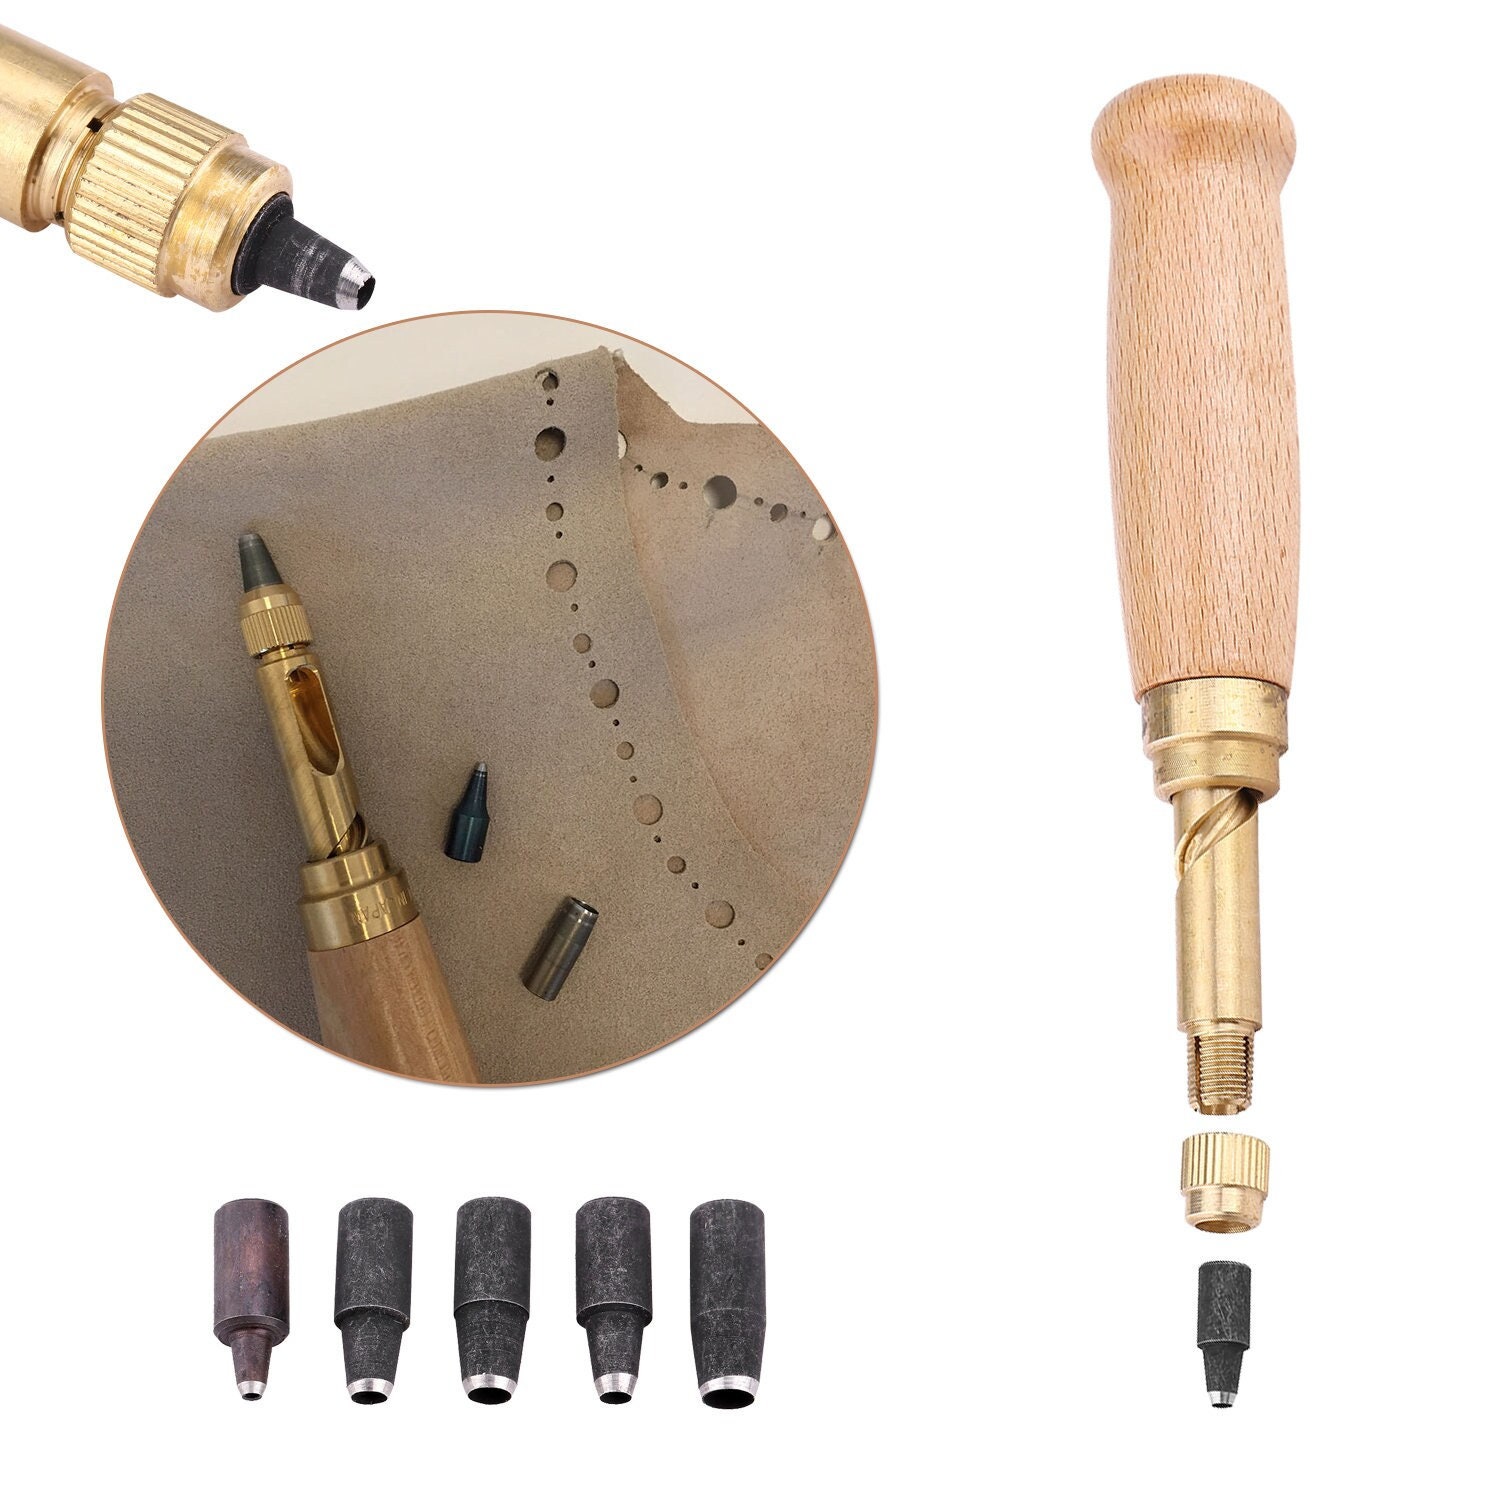 Hole punch, Japanese screw punch, brass / steel / wood, 5-1/4 inches with  1.75-4mm punch bits. Sold per 7-piece set. - Fire Mountain Gems and Beads